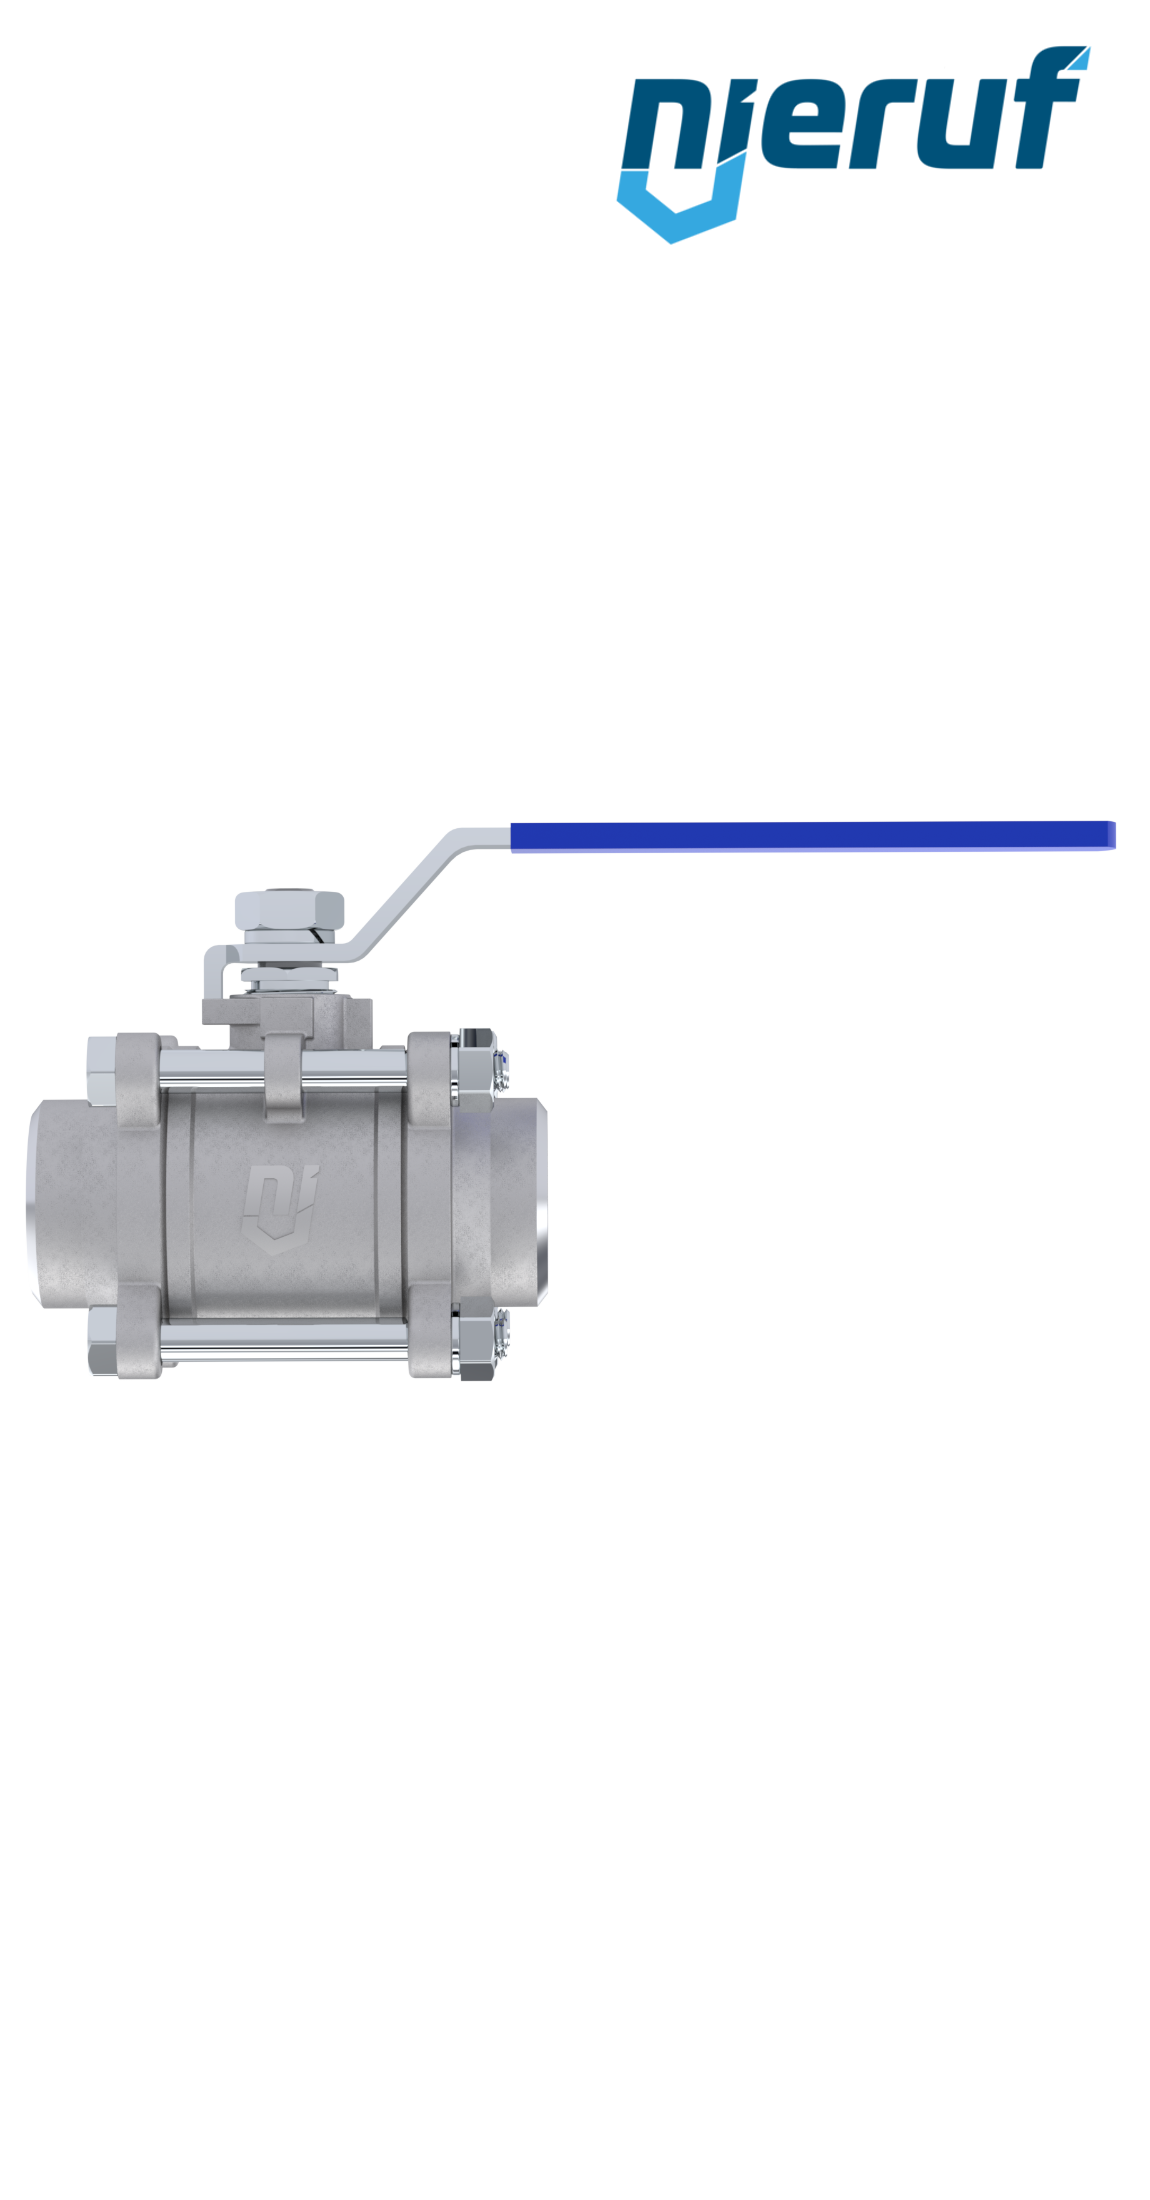 ball valve made of stainless steel DN15 - 1/2" inch GK04 with butt weld